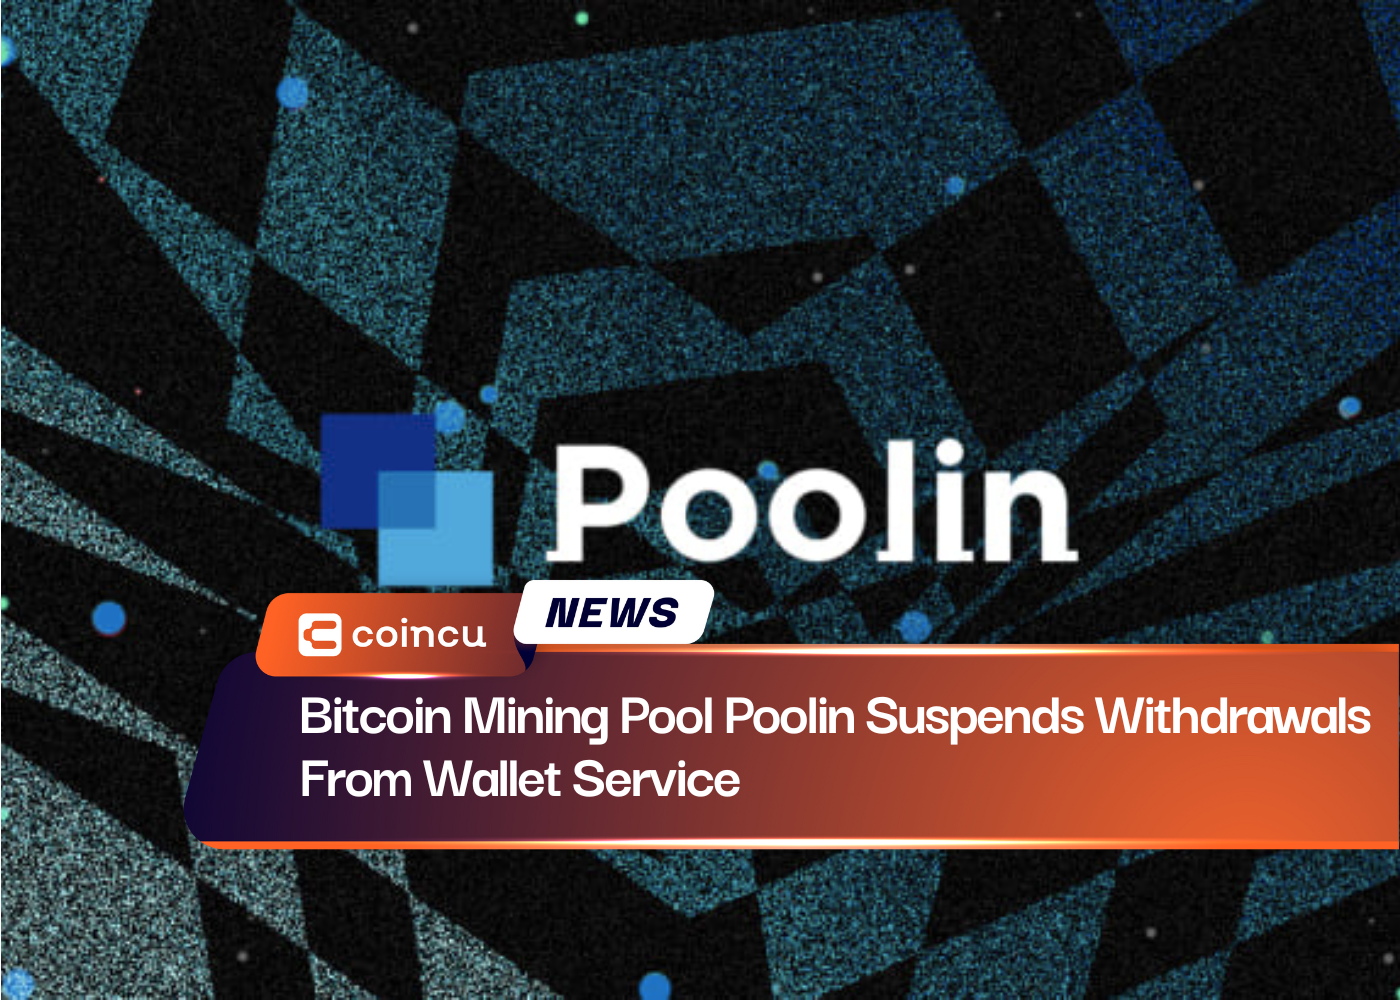 Bitcoin Mining Pool Poolin Suspends Withdrawals From Wallet Service